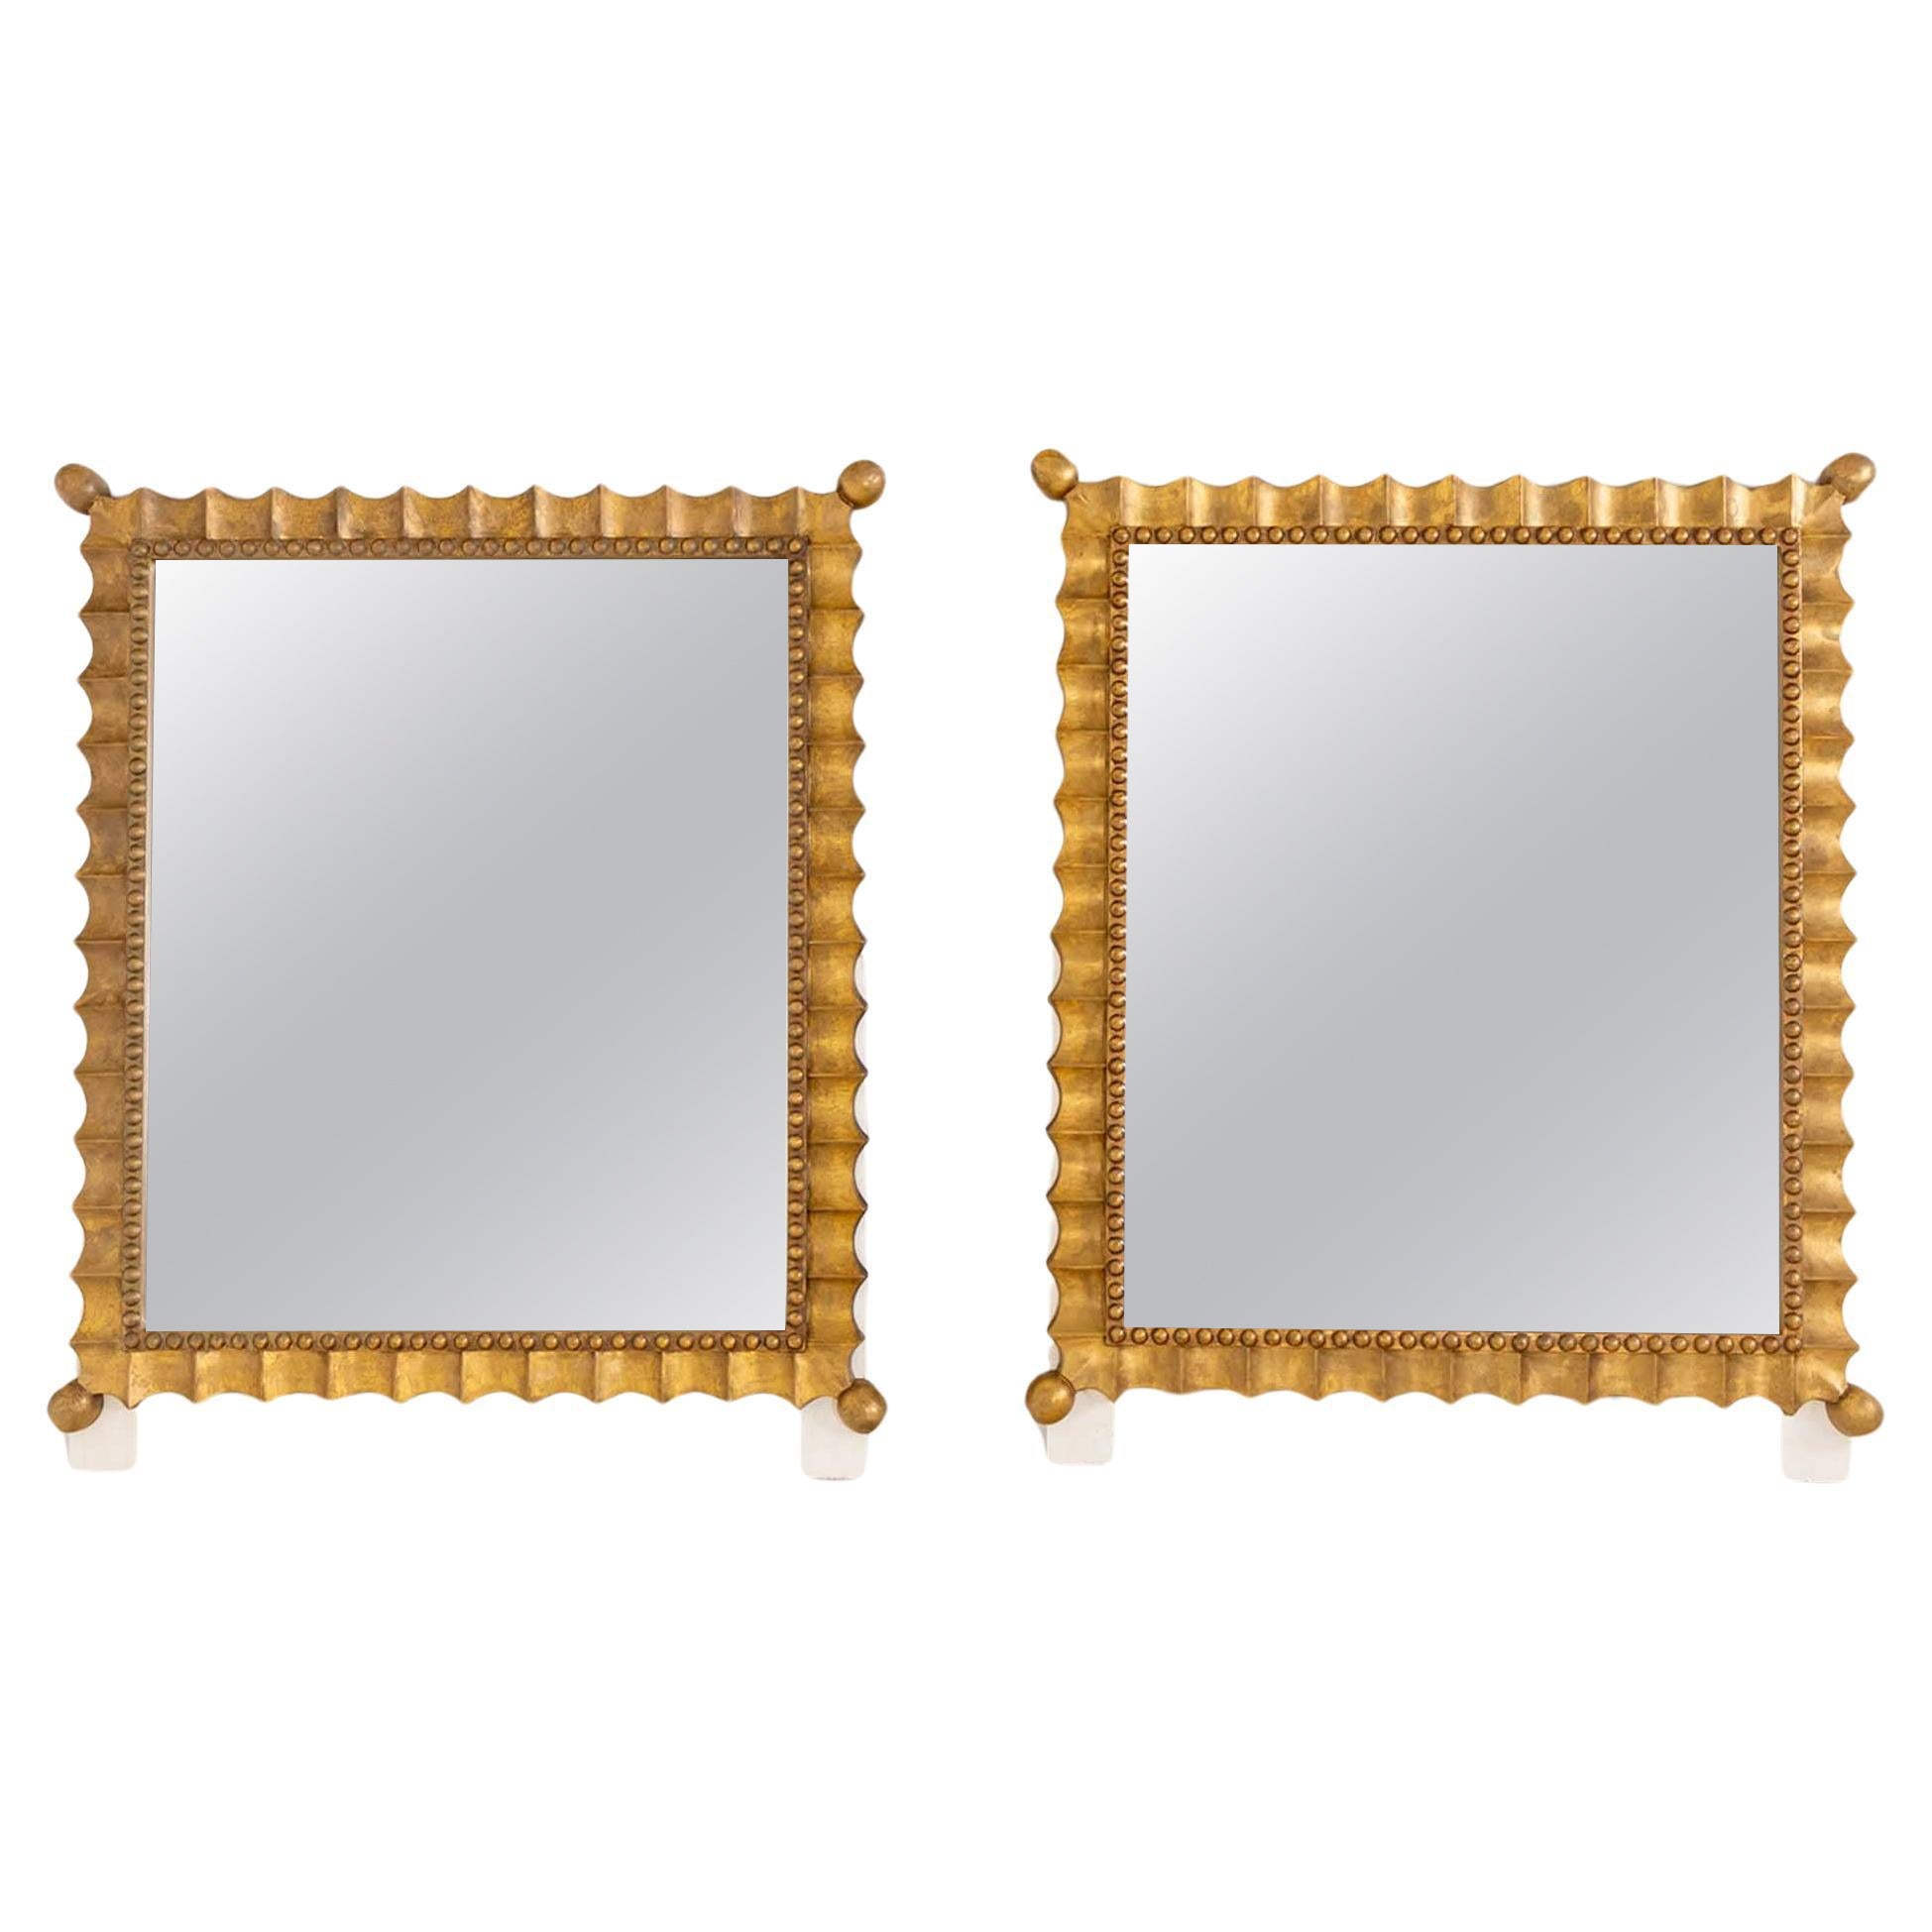 Pair of Gold-Patinated Scalloped Wall Mirrors, Mid-20th Century For Sale